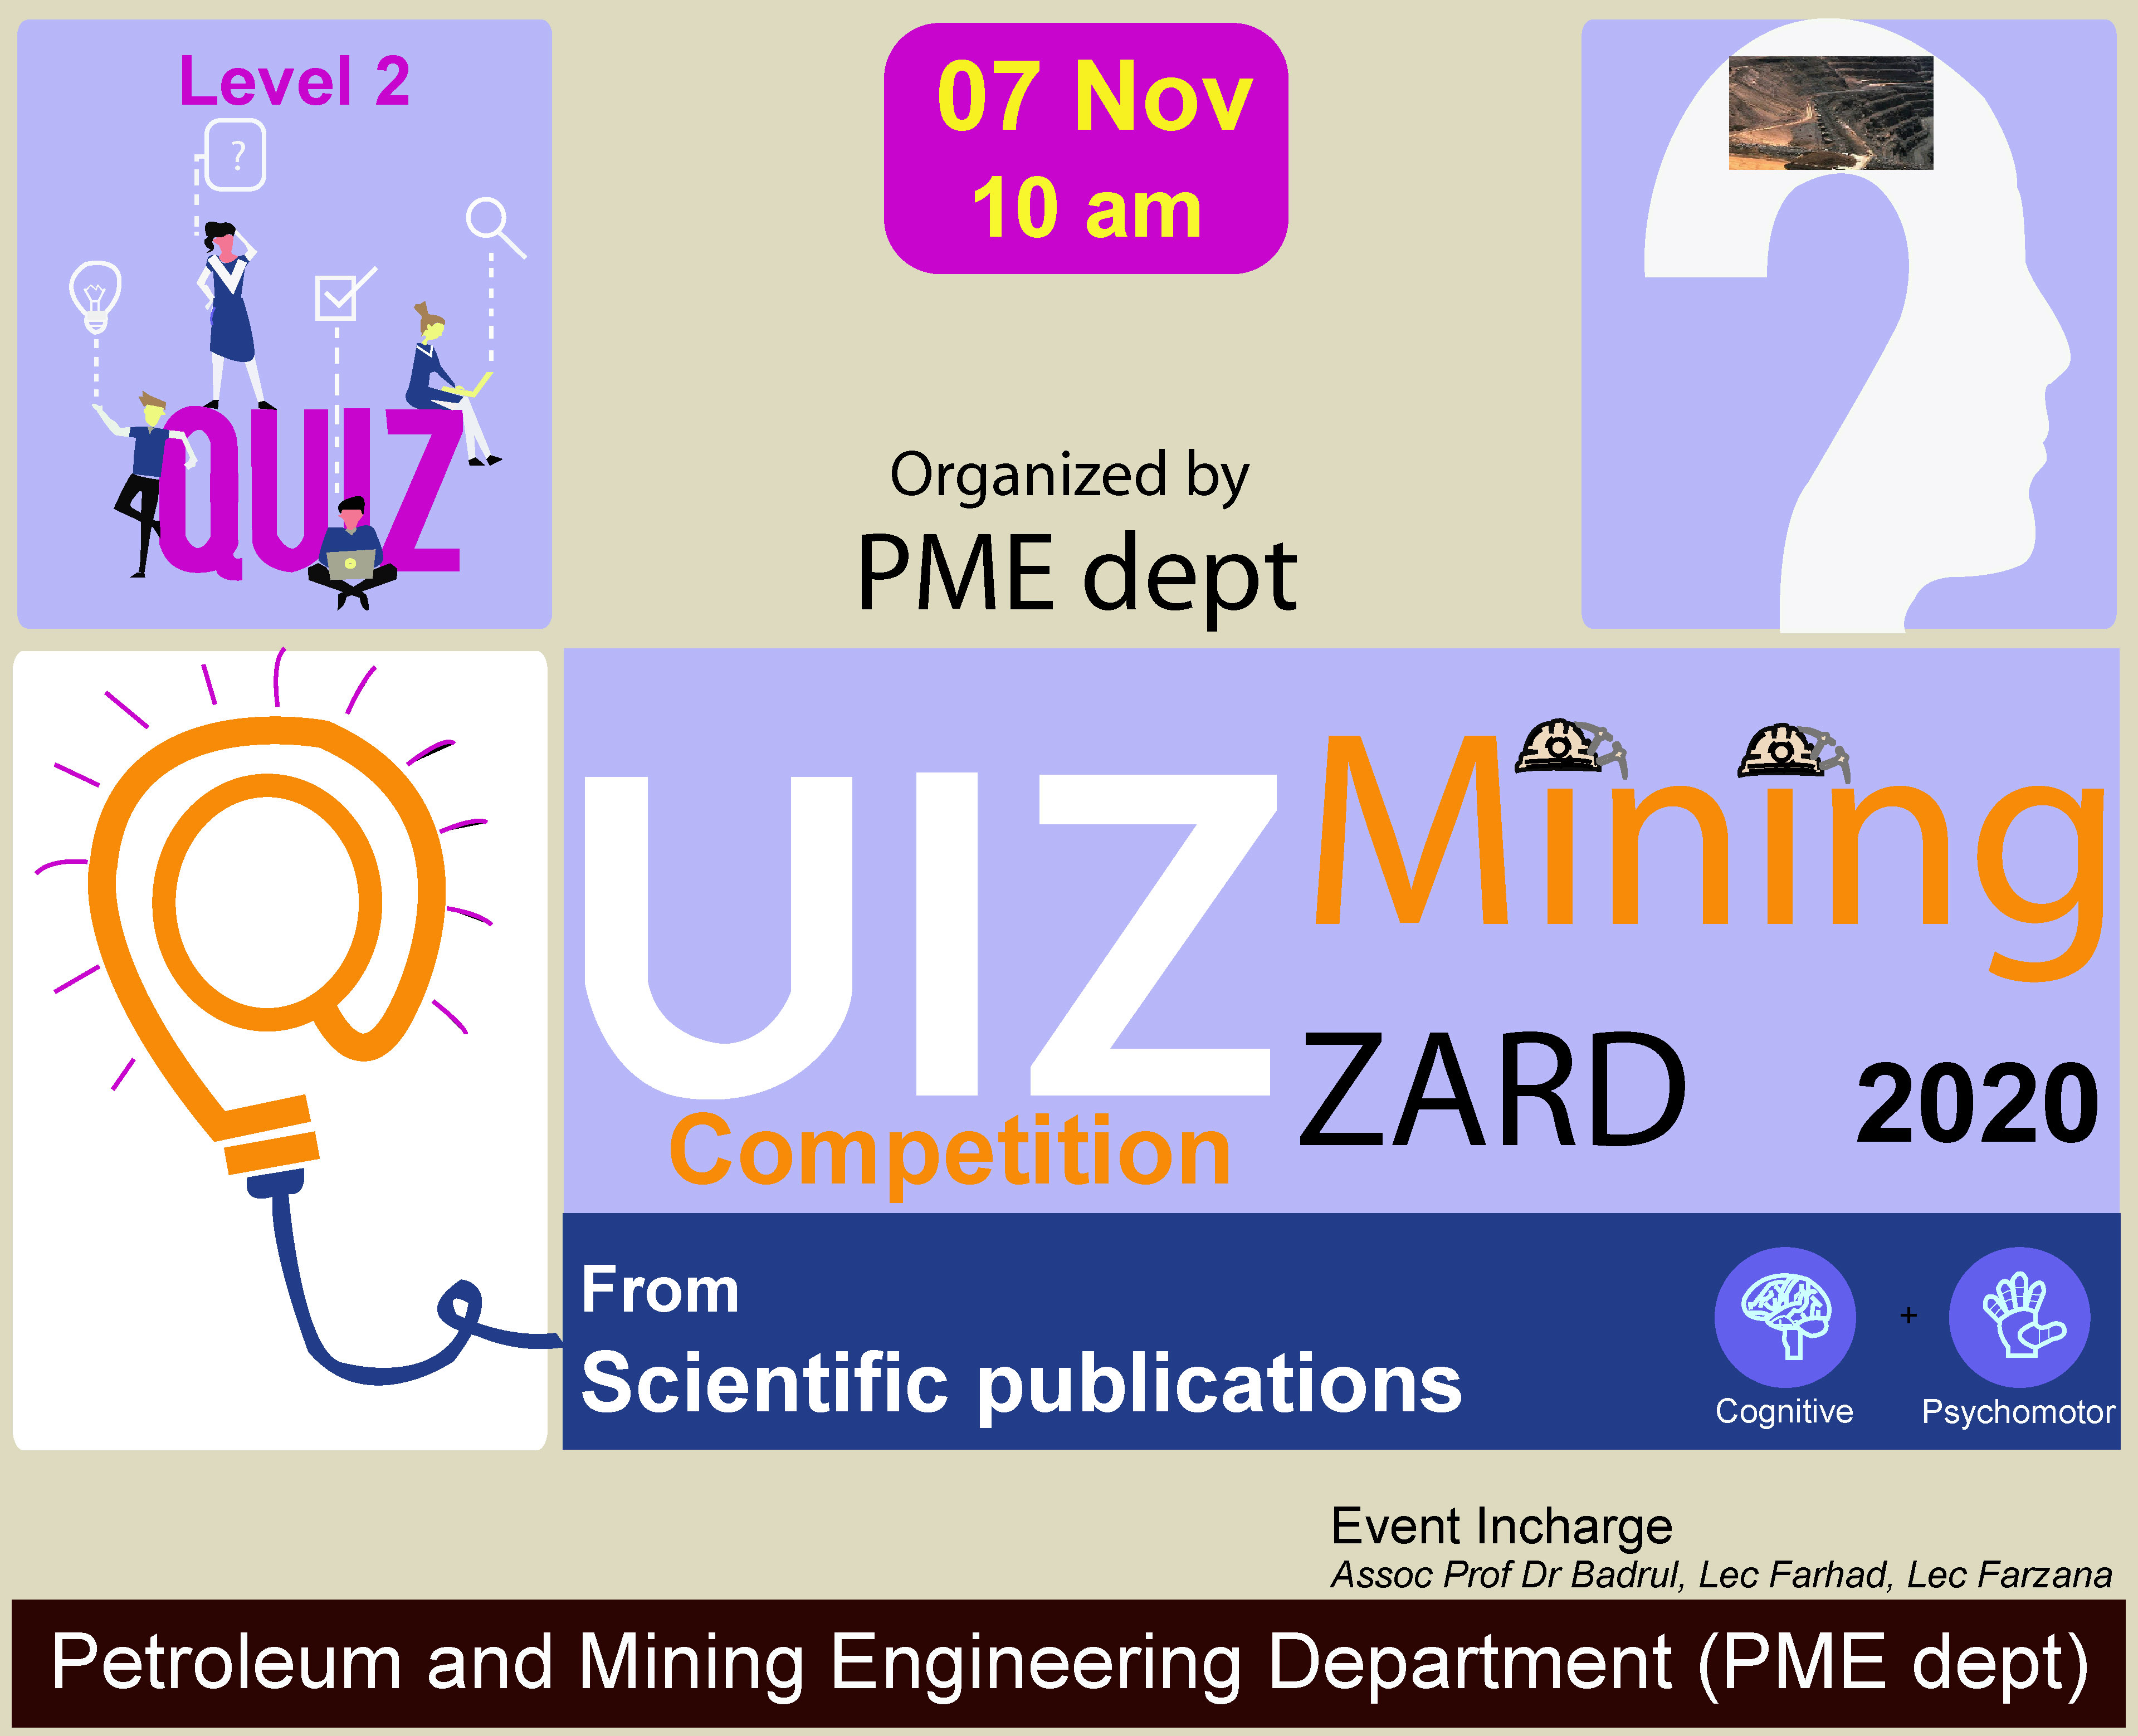 "Online Quiz Competition from Scientific Publications" arranged by Department of Petroleum and Mining Engineering